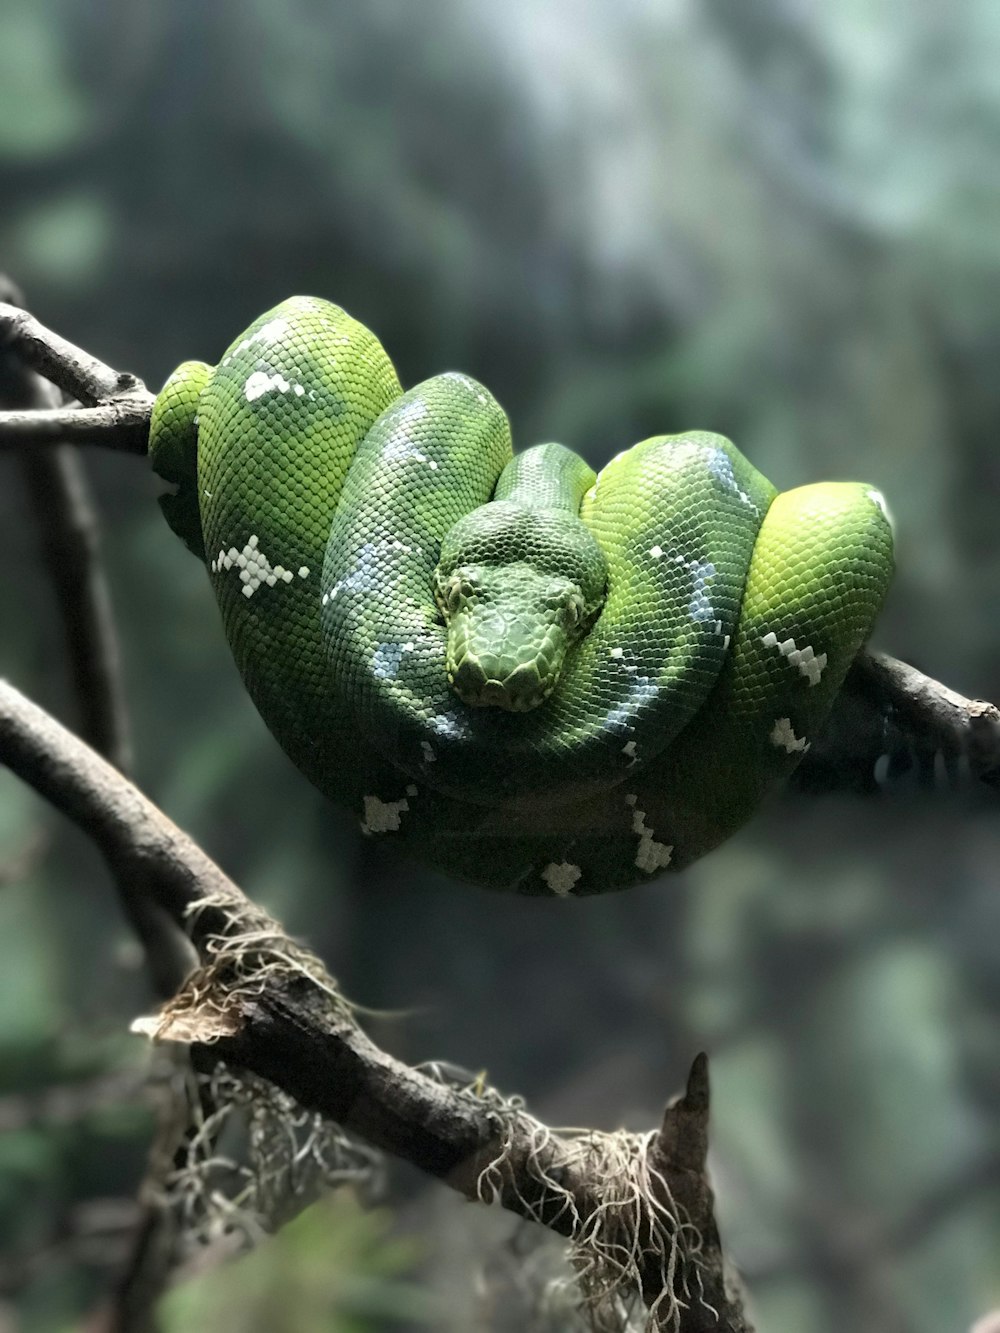 green snake on gray twig in selective focus photography